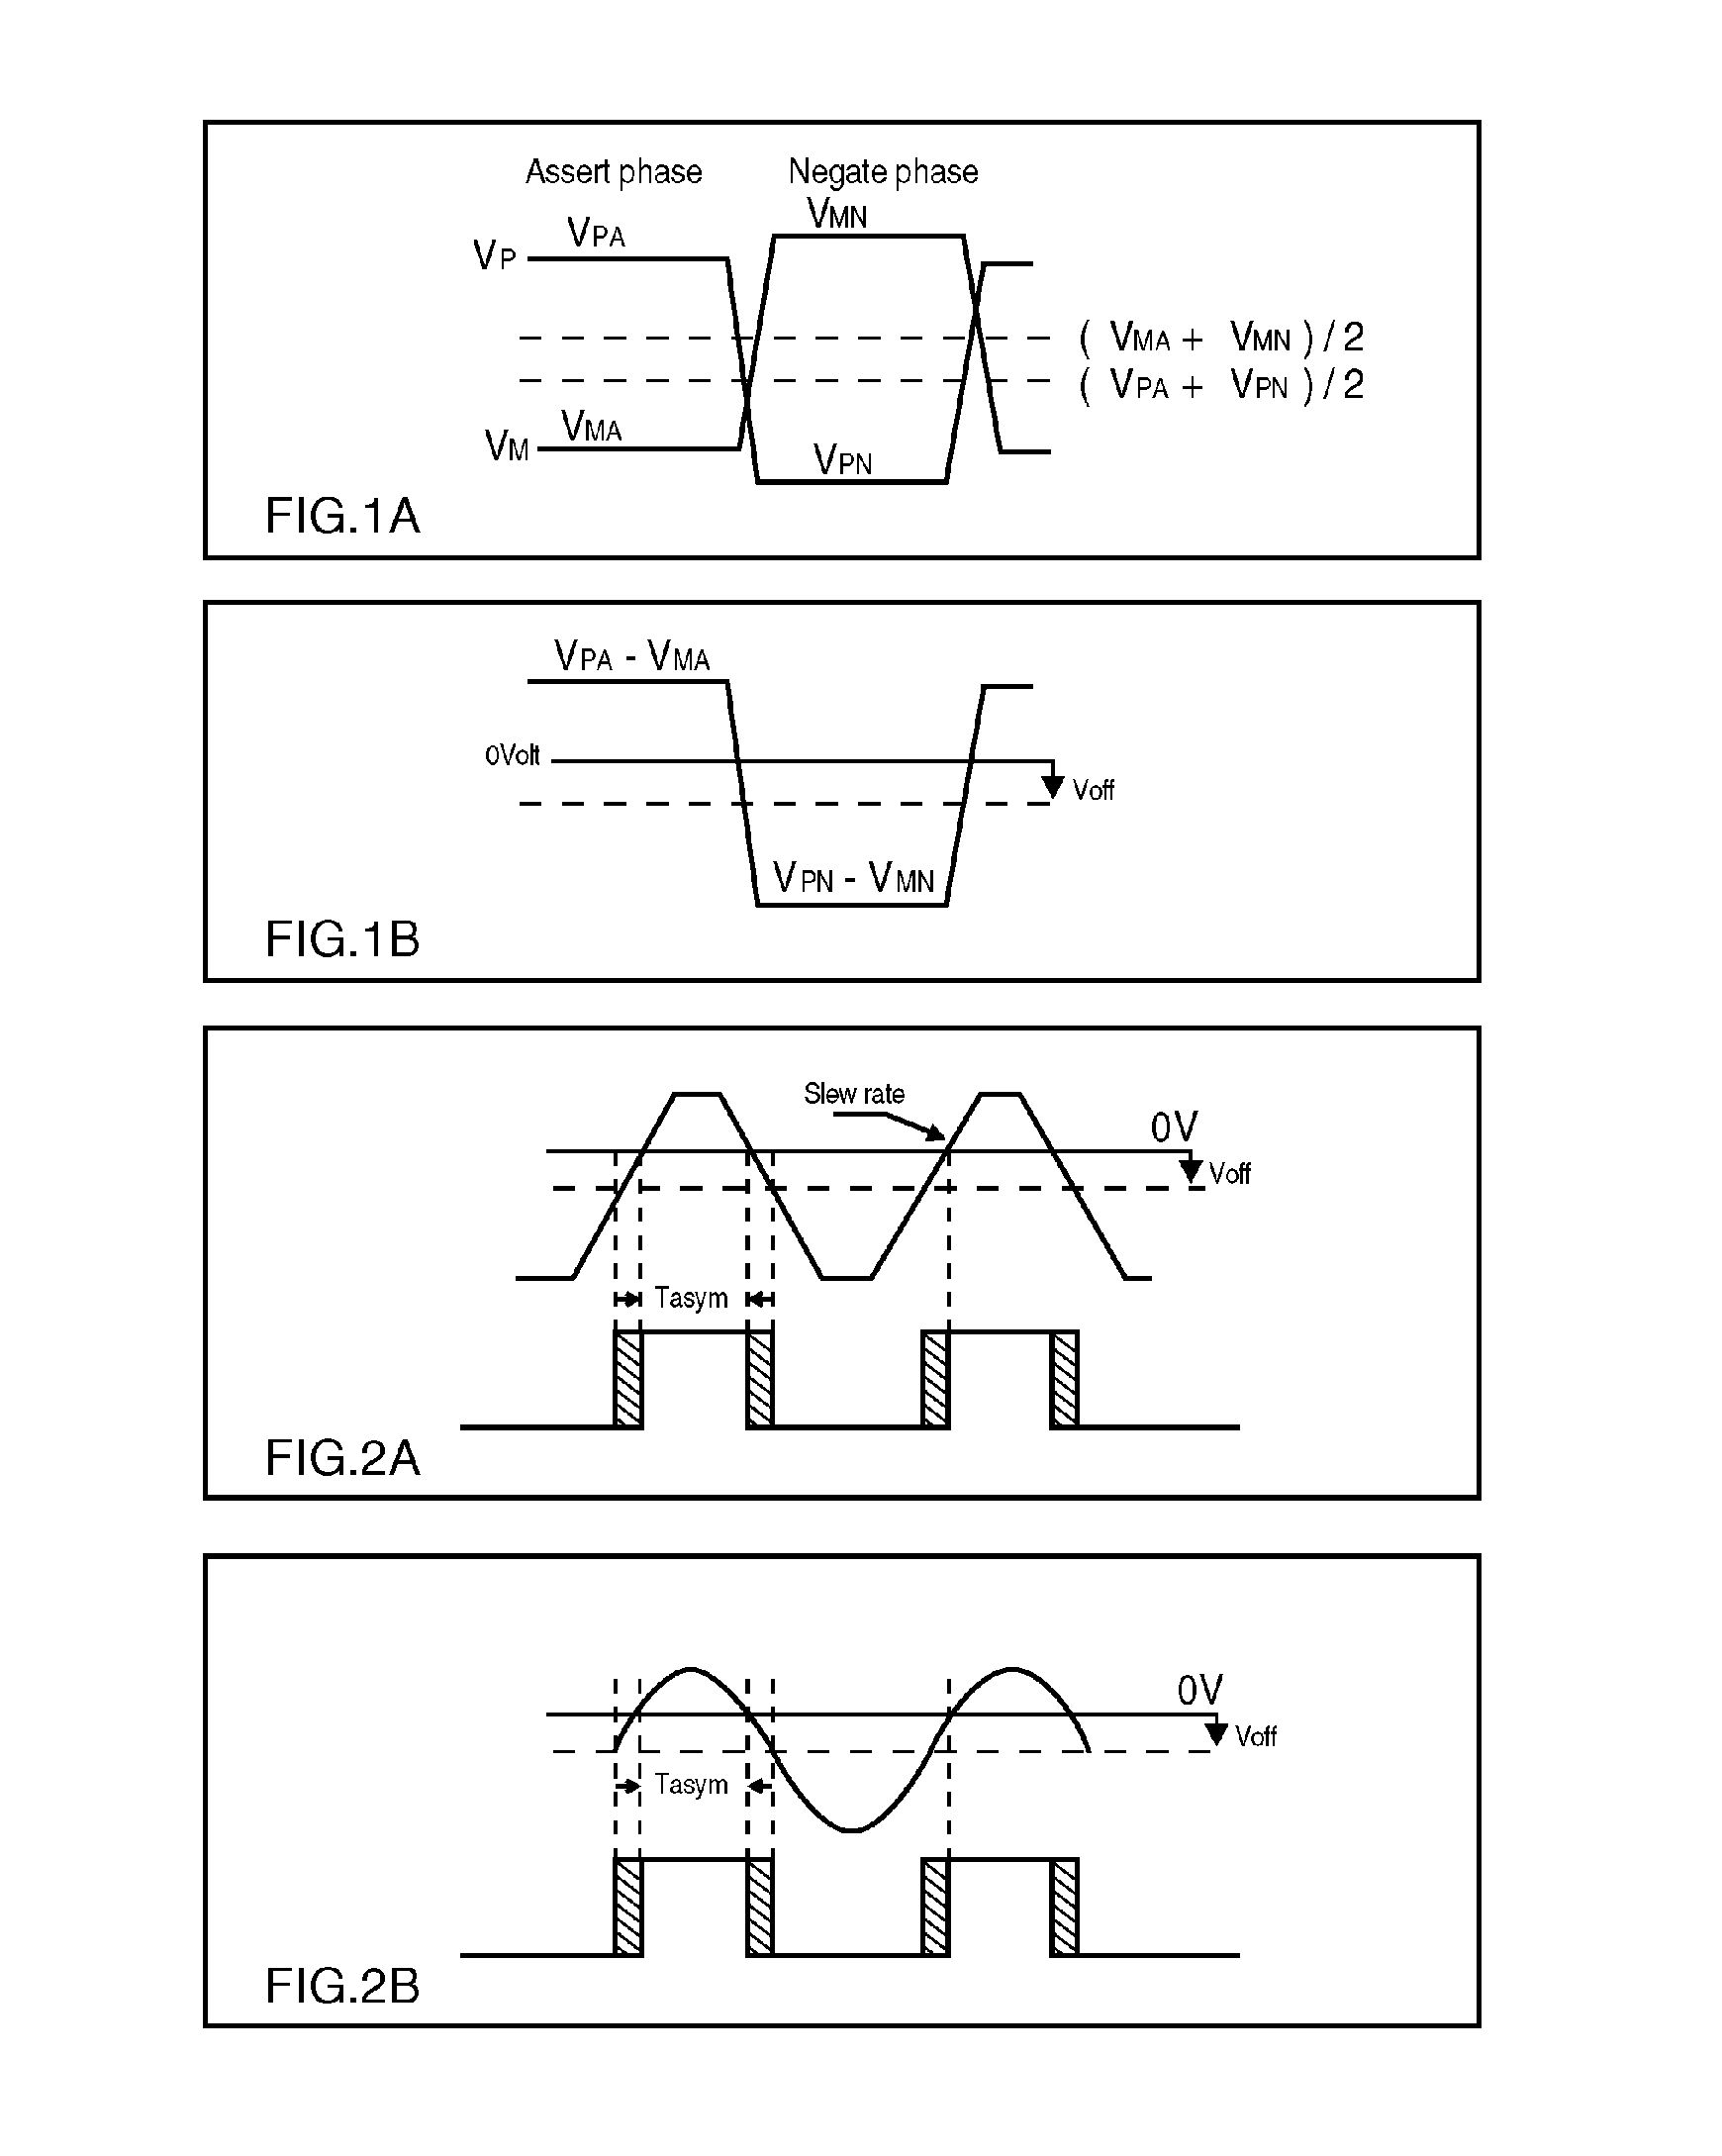 An improved receiver having full signal path differential offset cancellation capabilities